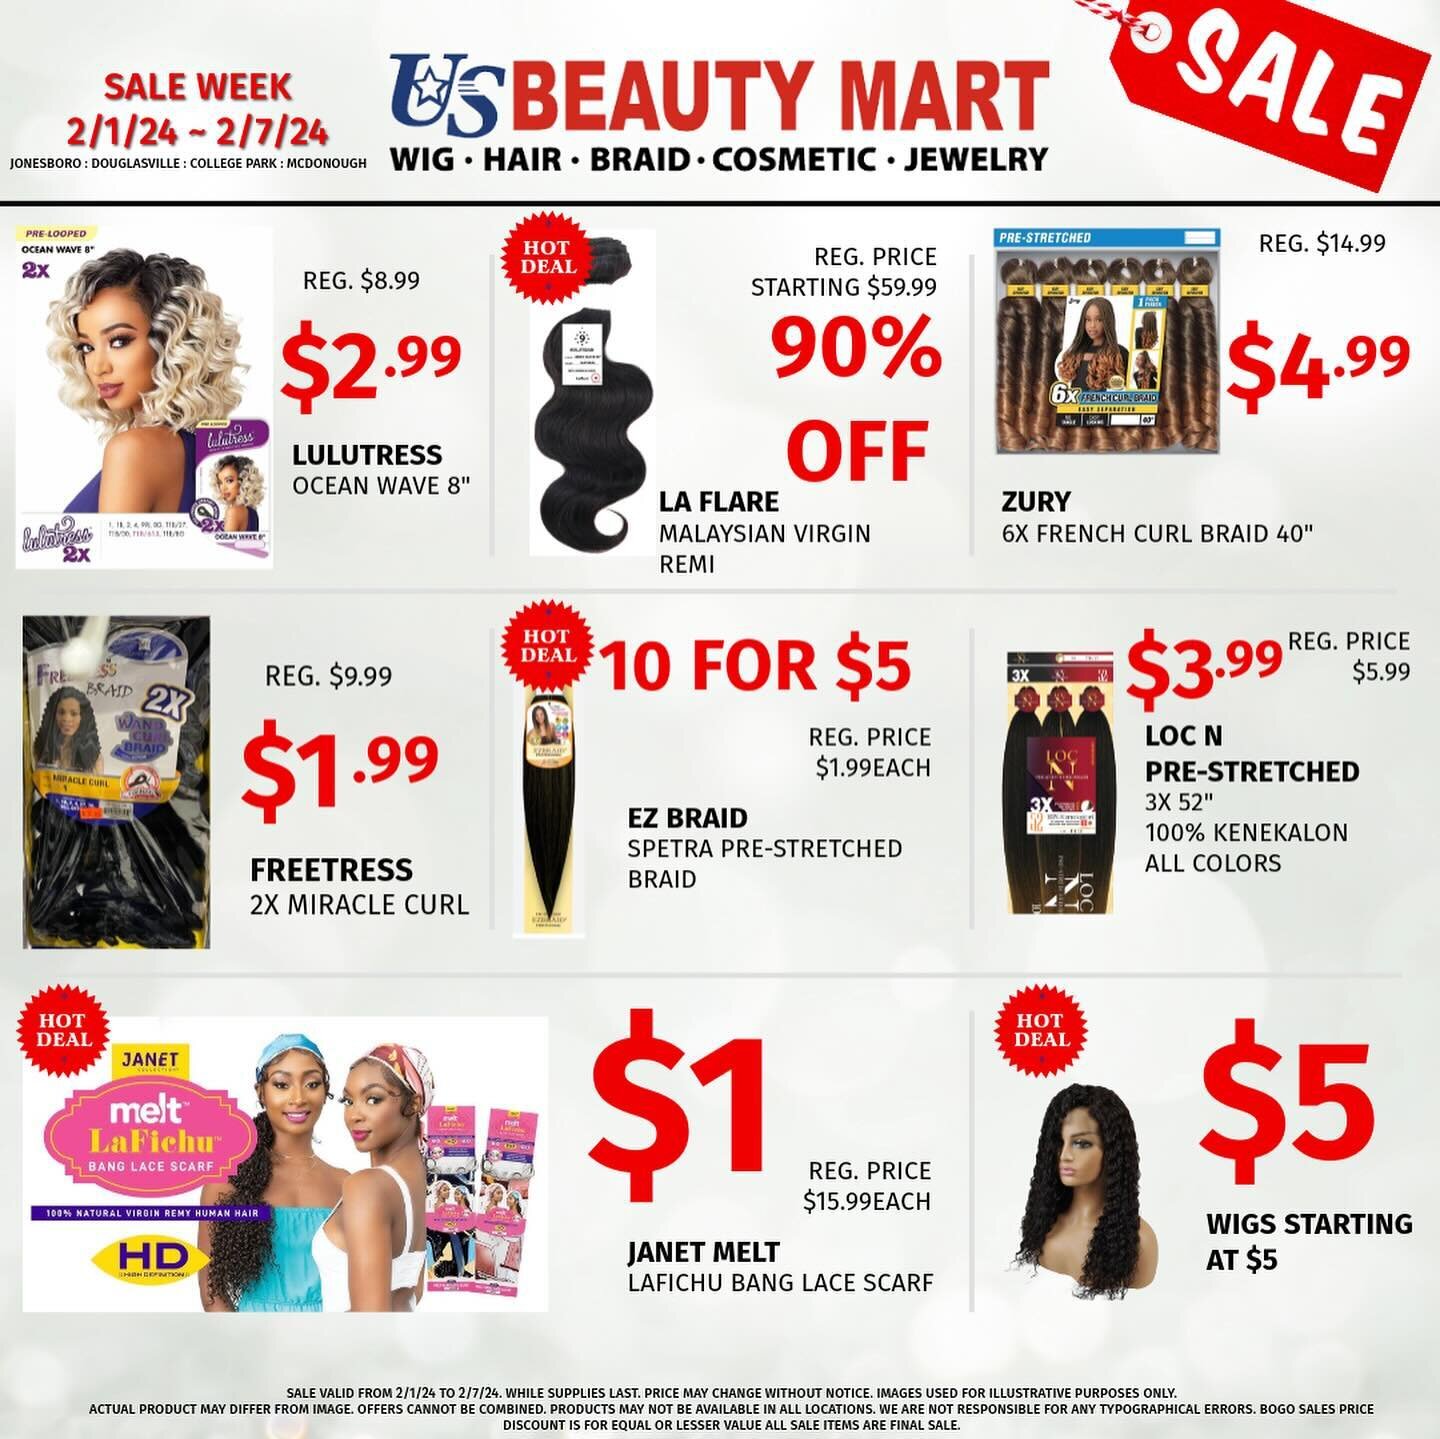 ❤️EARLY VALENTINE&rsquo;S DAY SALE❤️

Get ahead of the Valentine&rsquo;s Day Shopping Rush with these incredible savings!!

10 pages of savings this week!!

Don&rsquo;t wait for the last minute, when you can grab these deals two weeks in advance!!

M